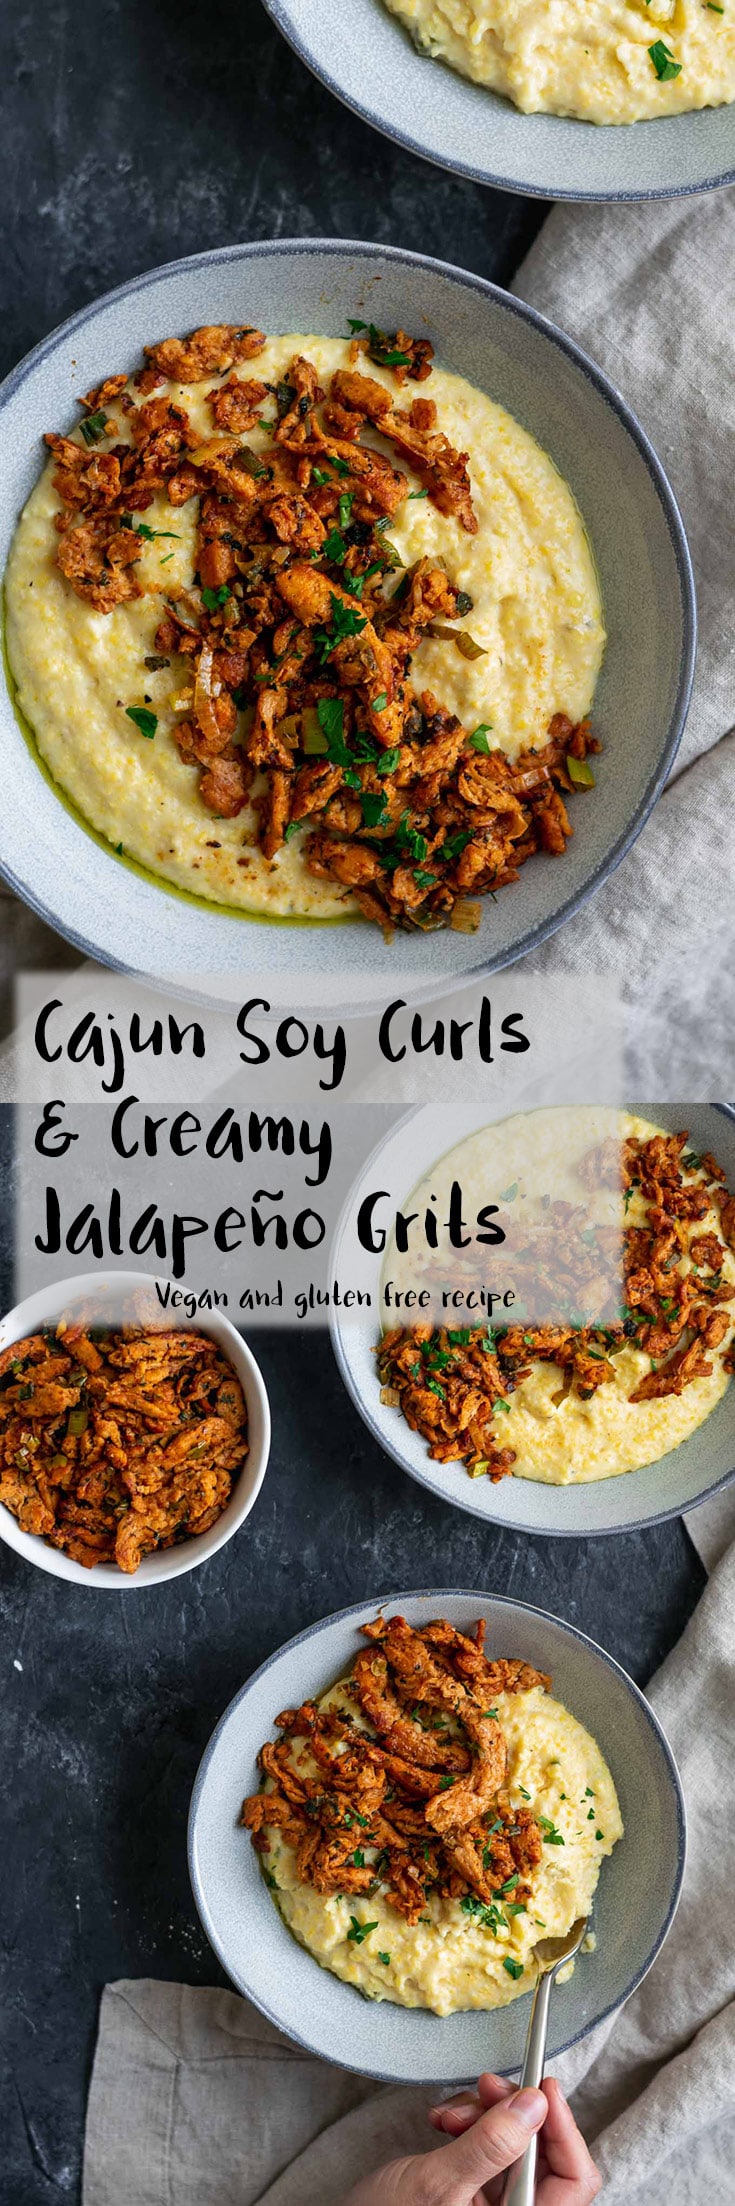 Creamy jalapeño grits are topped with super flavorful cajun-spiced soy curls for the perfect vegan and gluten free brunch. A plant based take on the traditional southern dish cajun shrimp and grits. | thecuriouschickpea #vegan #veganbrunch #brunch #grits #glutenfree